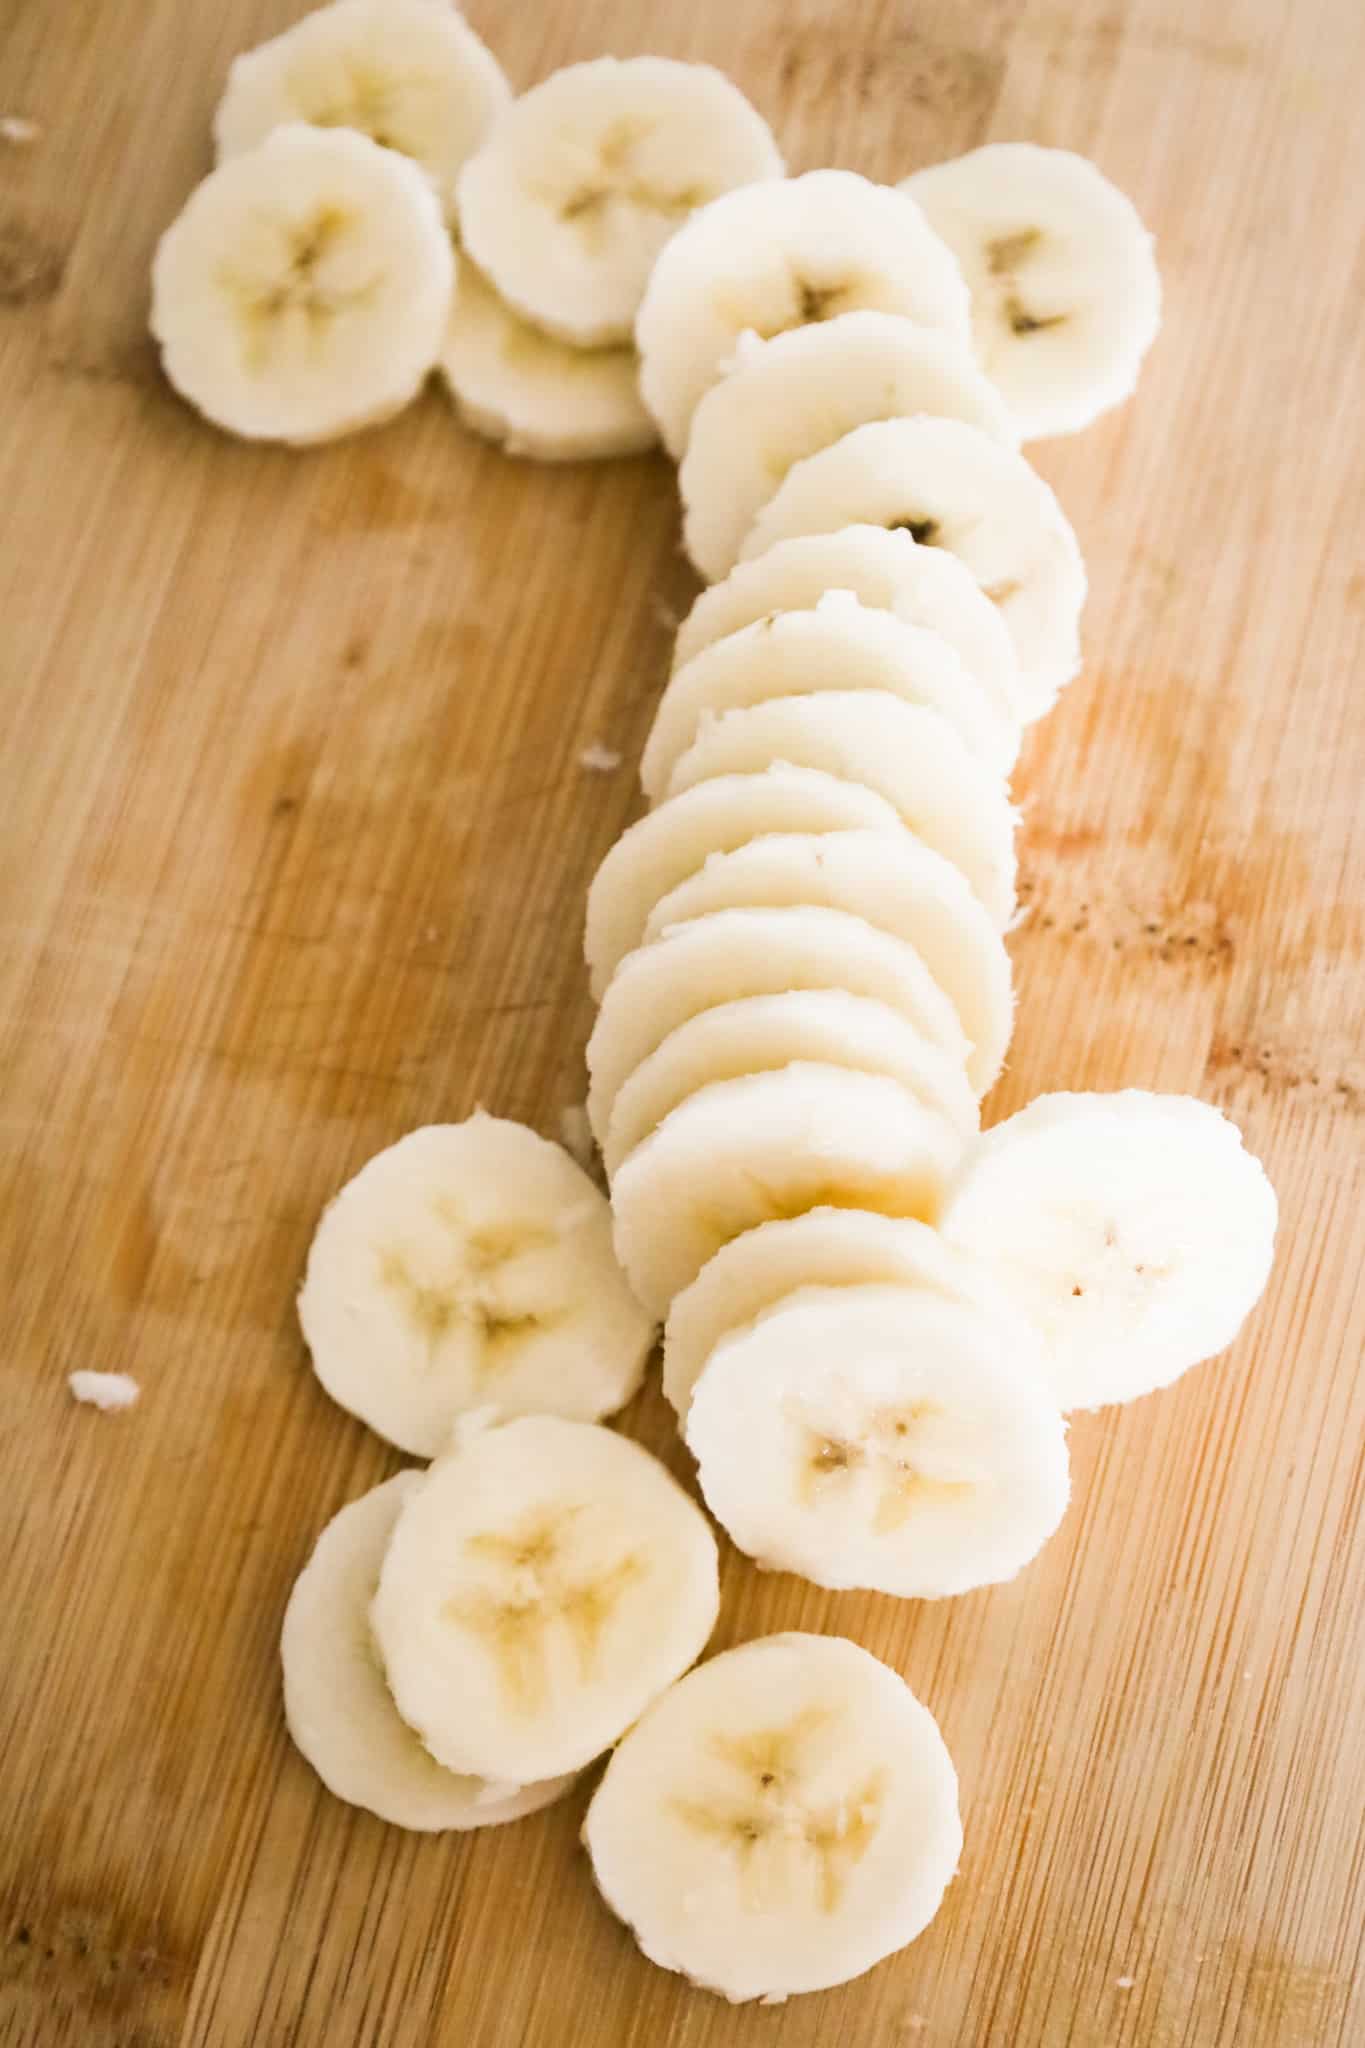 banana slices on a cutting board